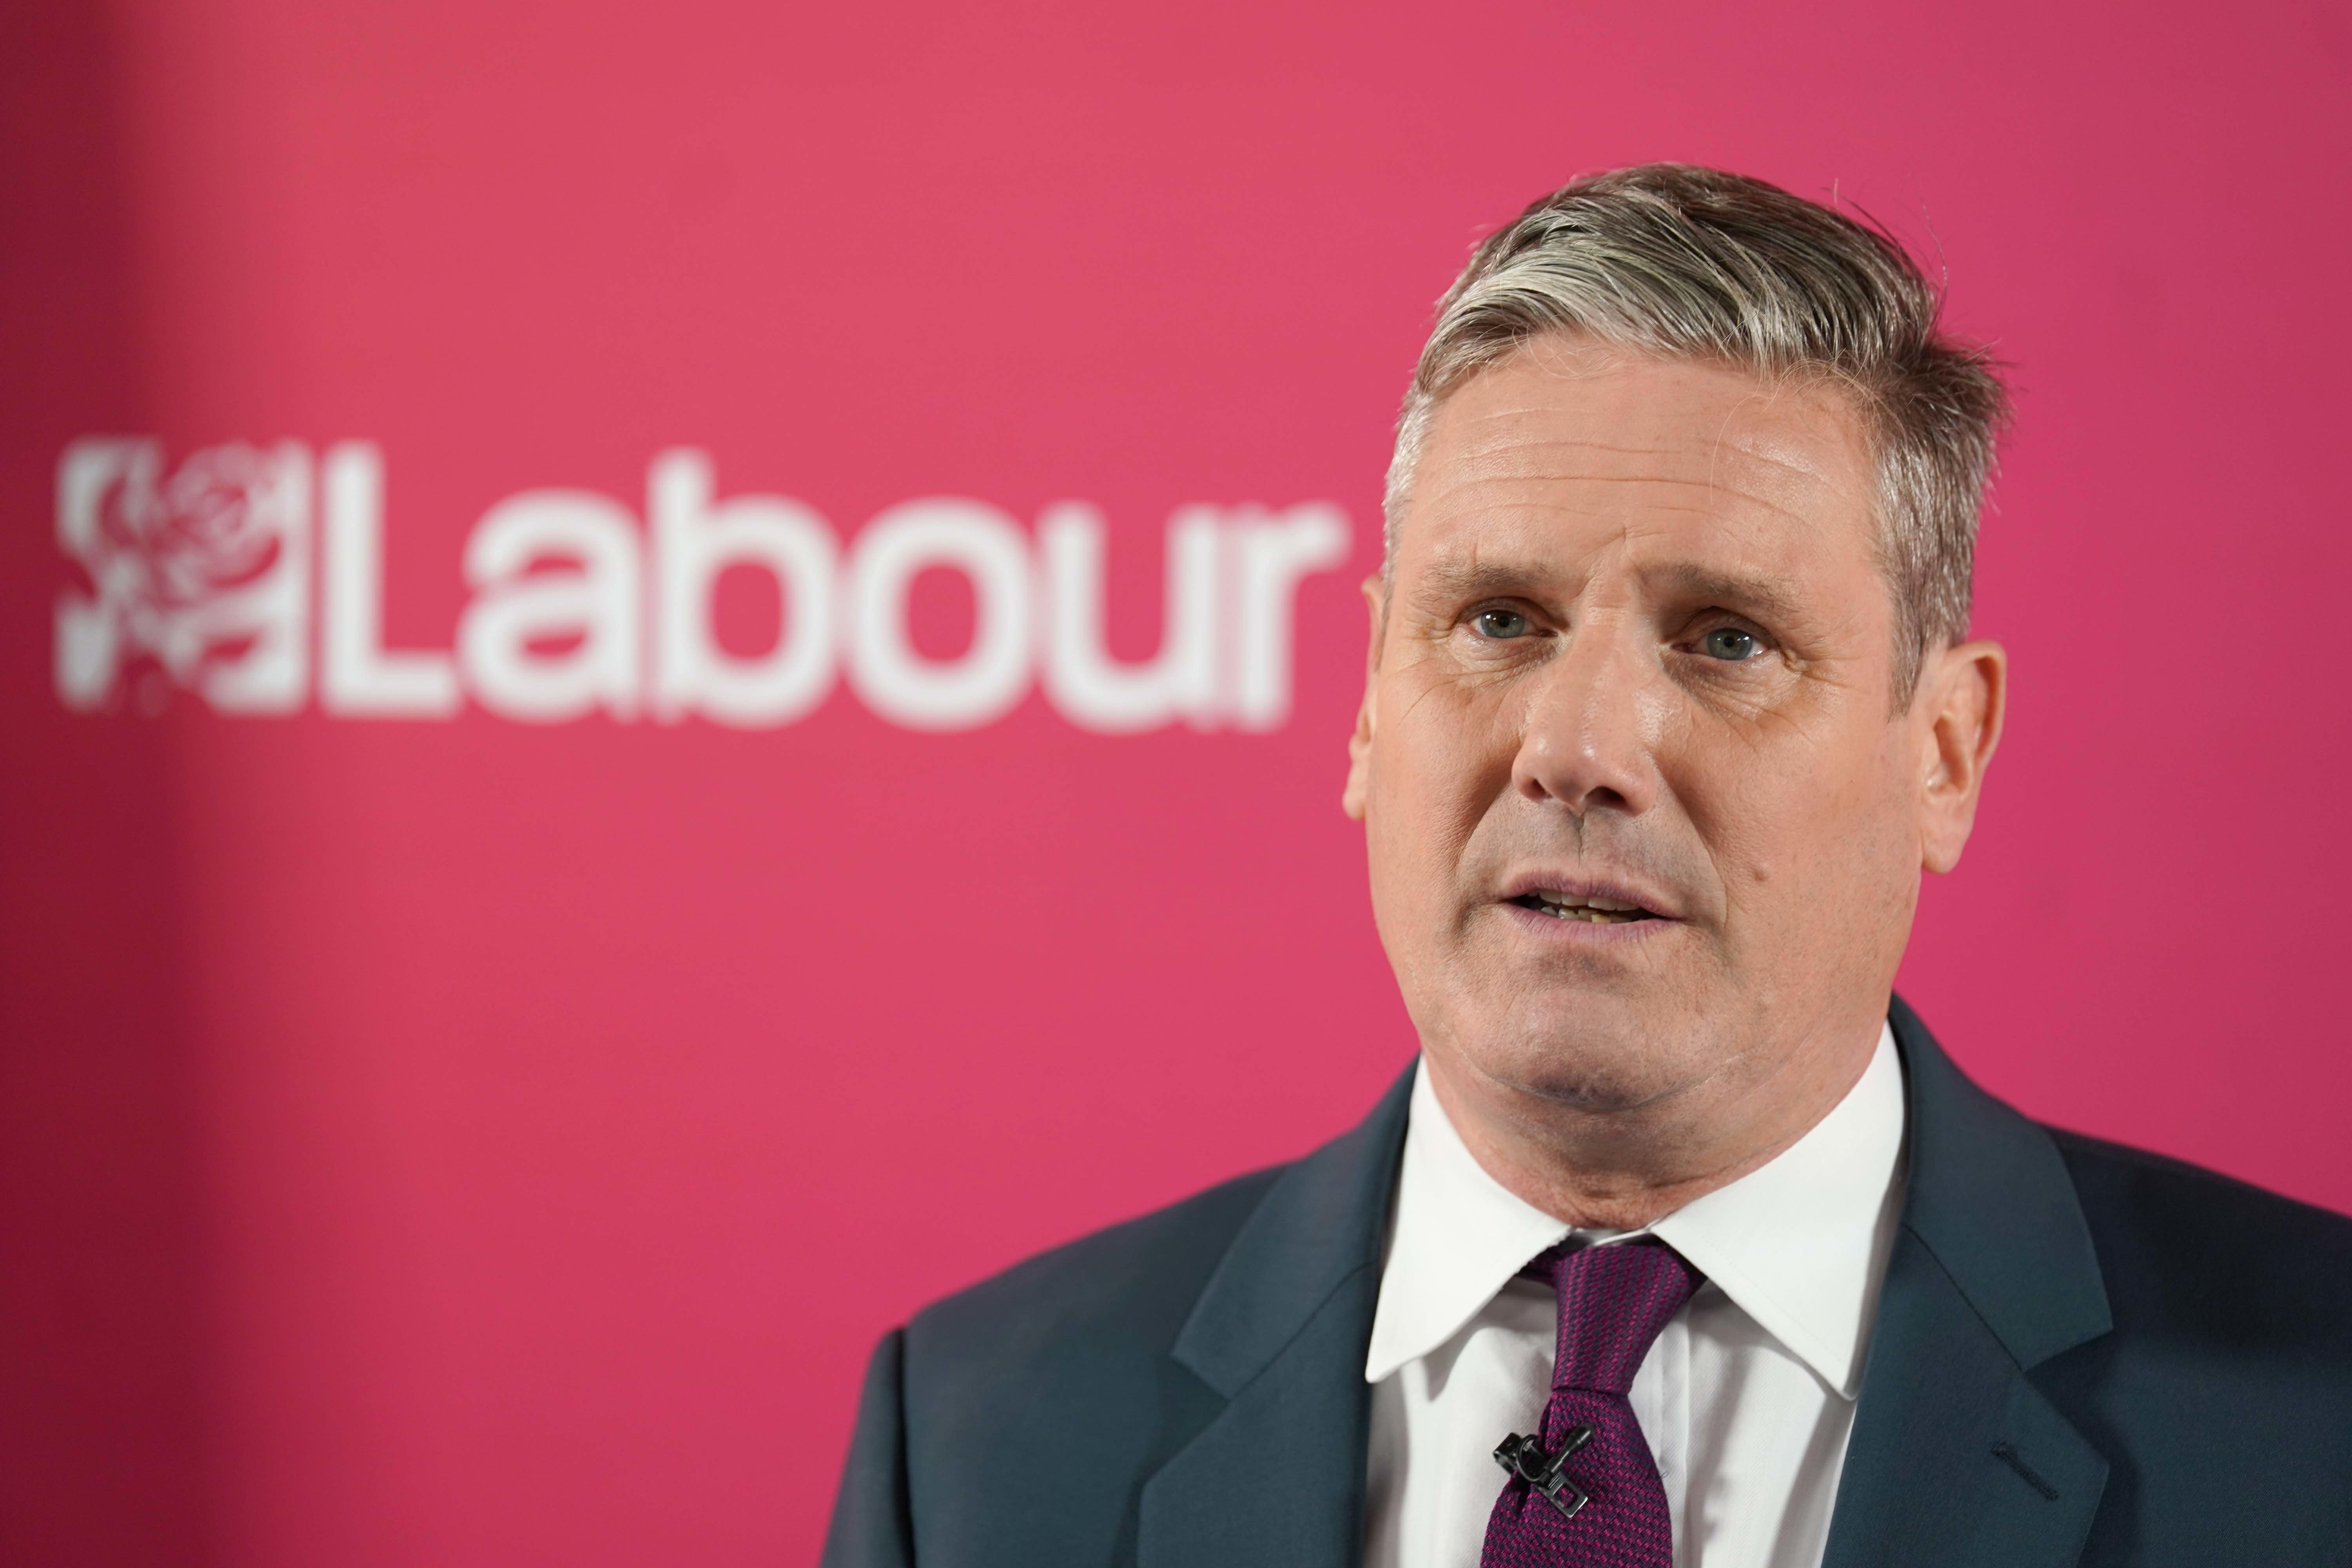 Labour leader Sir Keir Starmer promised to grill Sunak on schools at PMQs